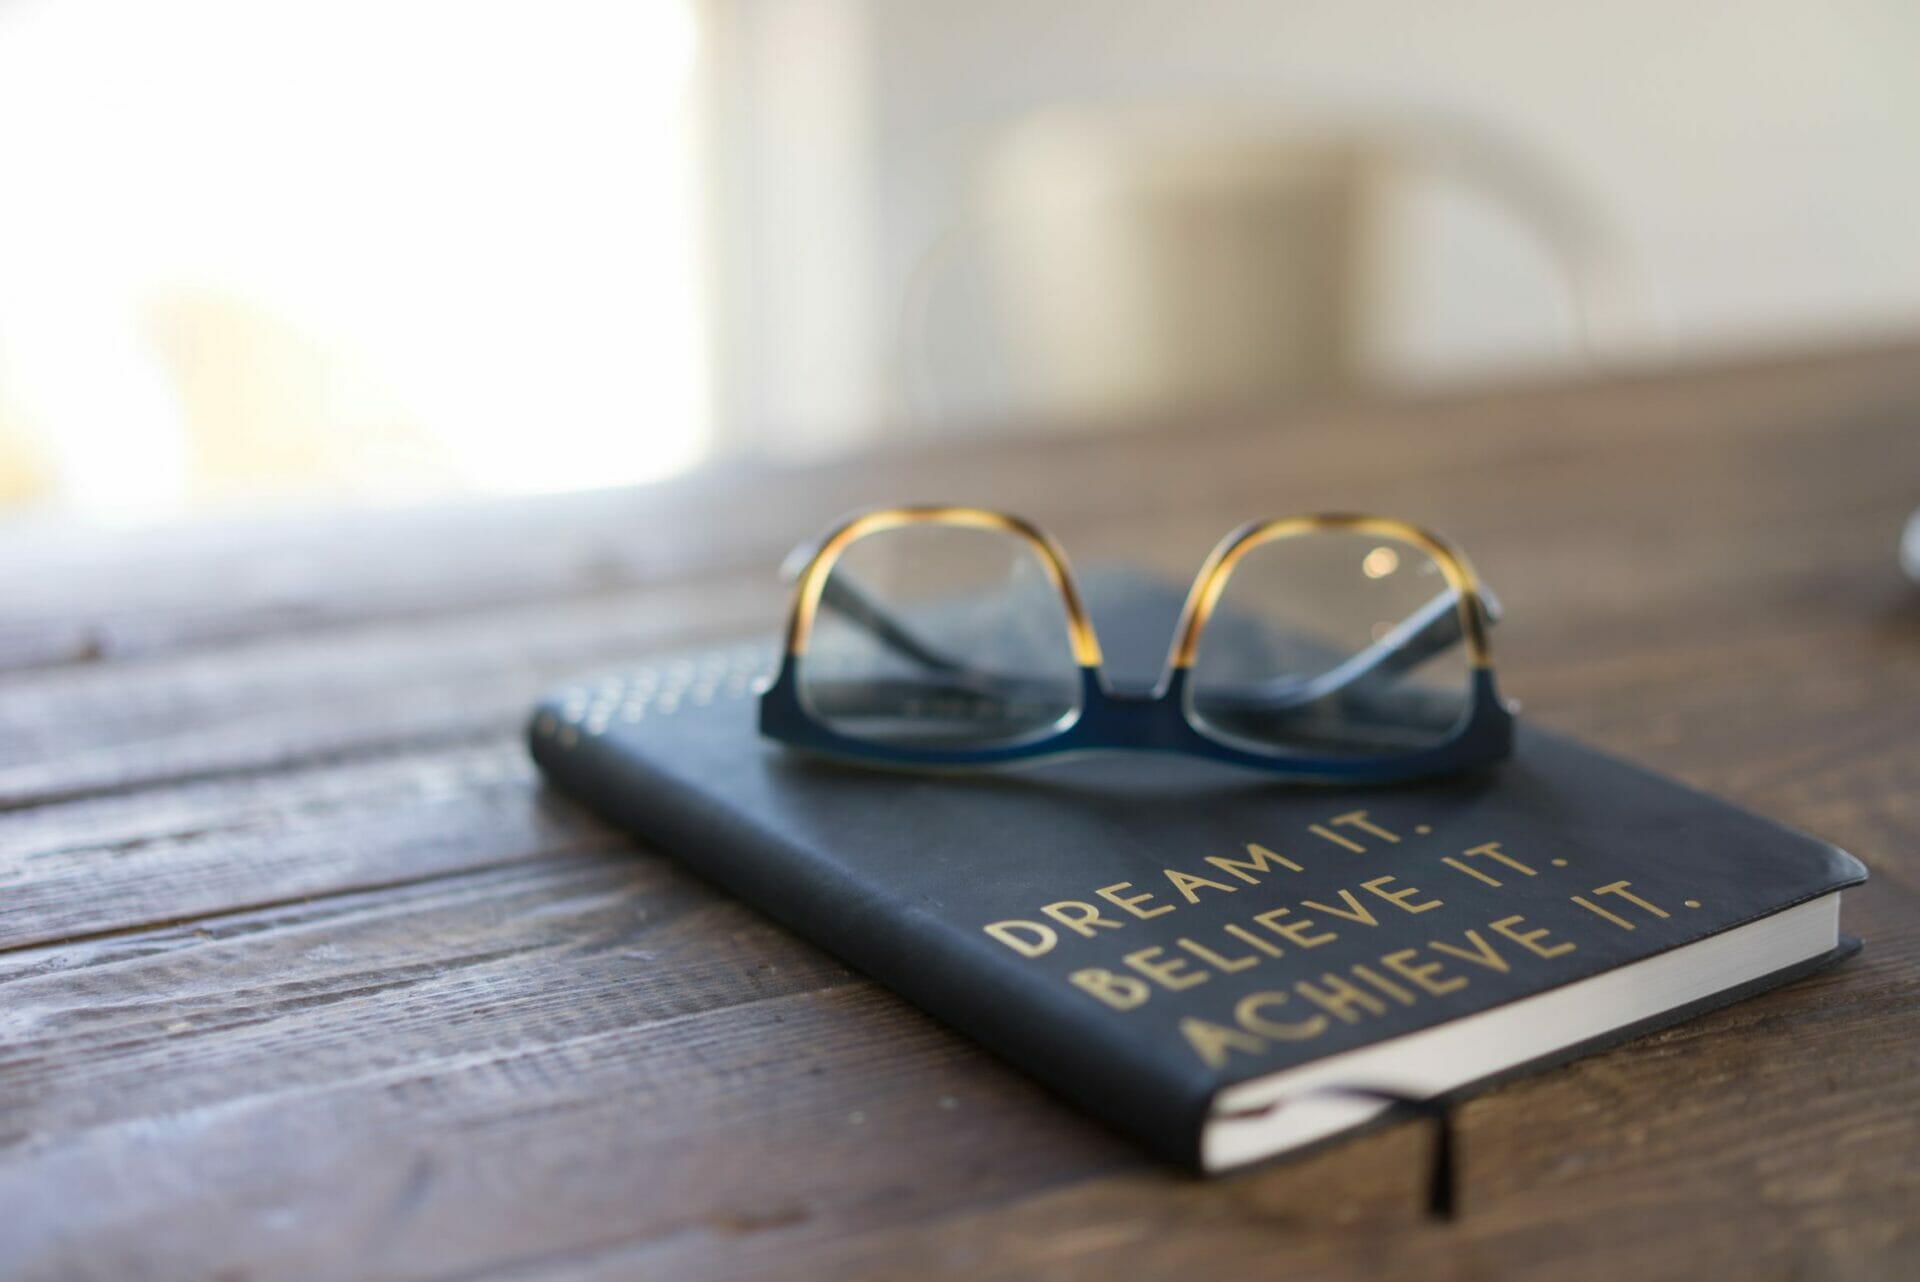 Eyeglasses laying on top of Journal - How to Dream the “Impossible” Dream … And Prioritize It.